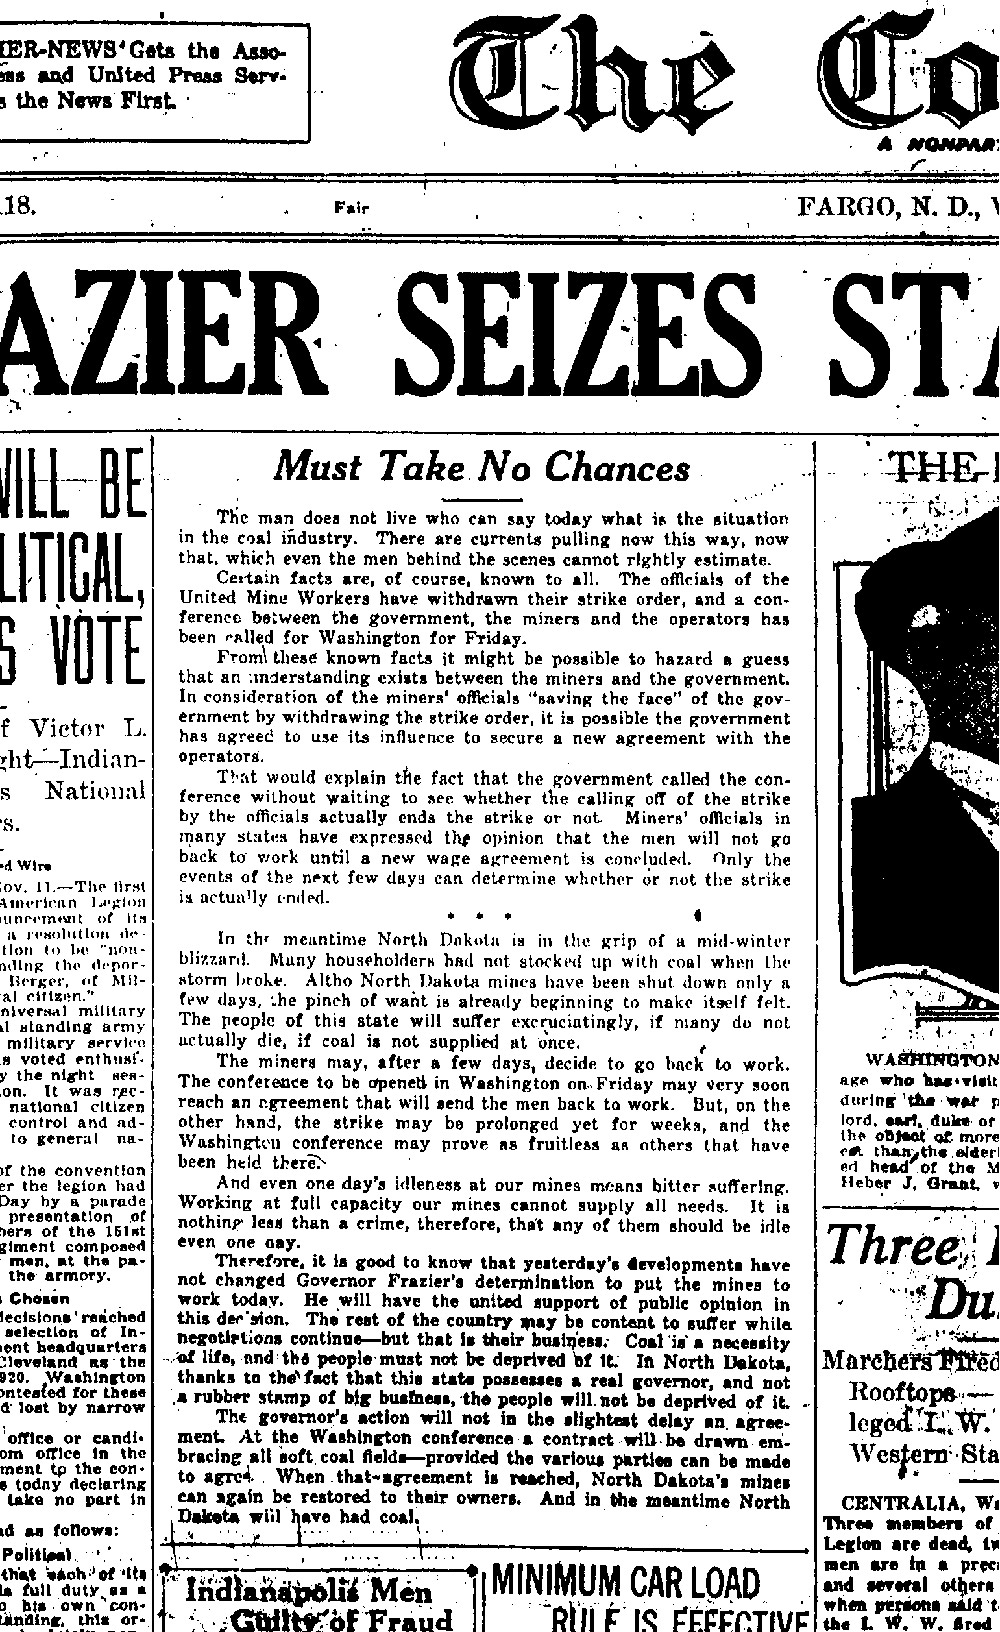 When the mines were closed by the strike, Governor Frazier sent National Guard troops to re-open the mines.  The Fargo Courier News supported the governor’s decision. 